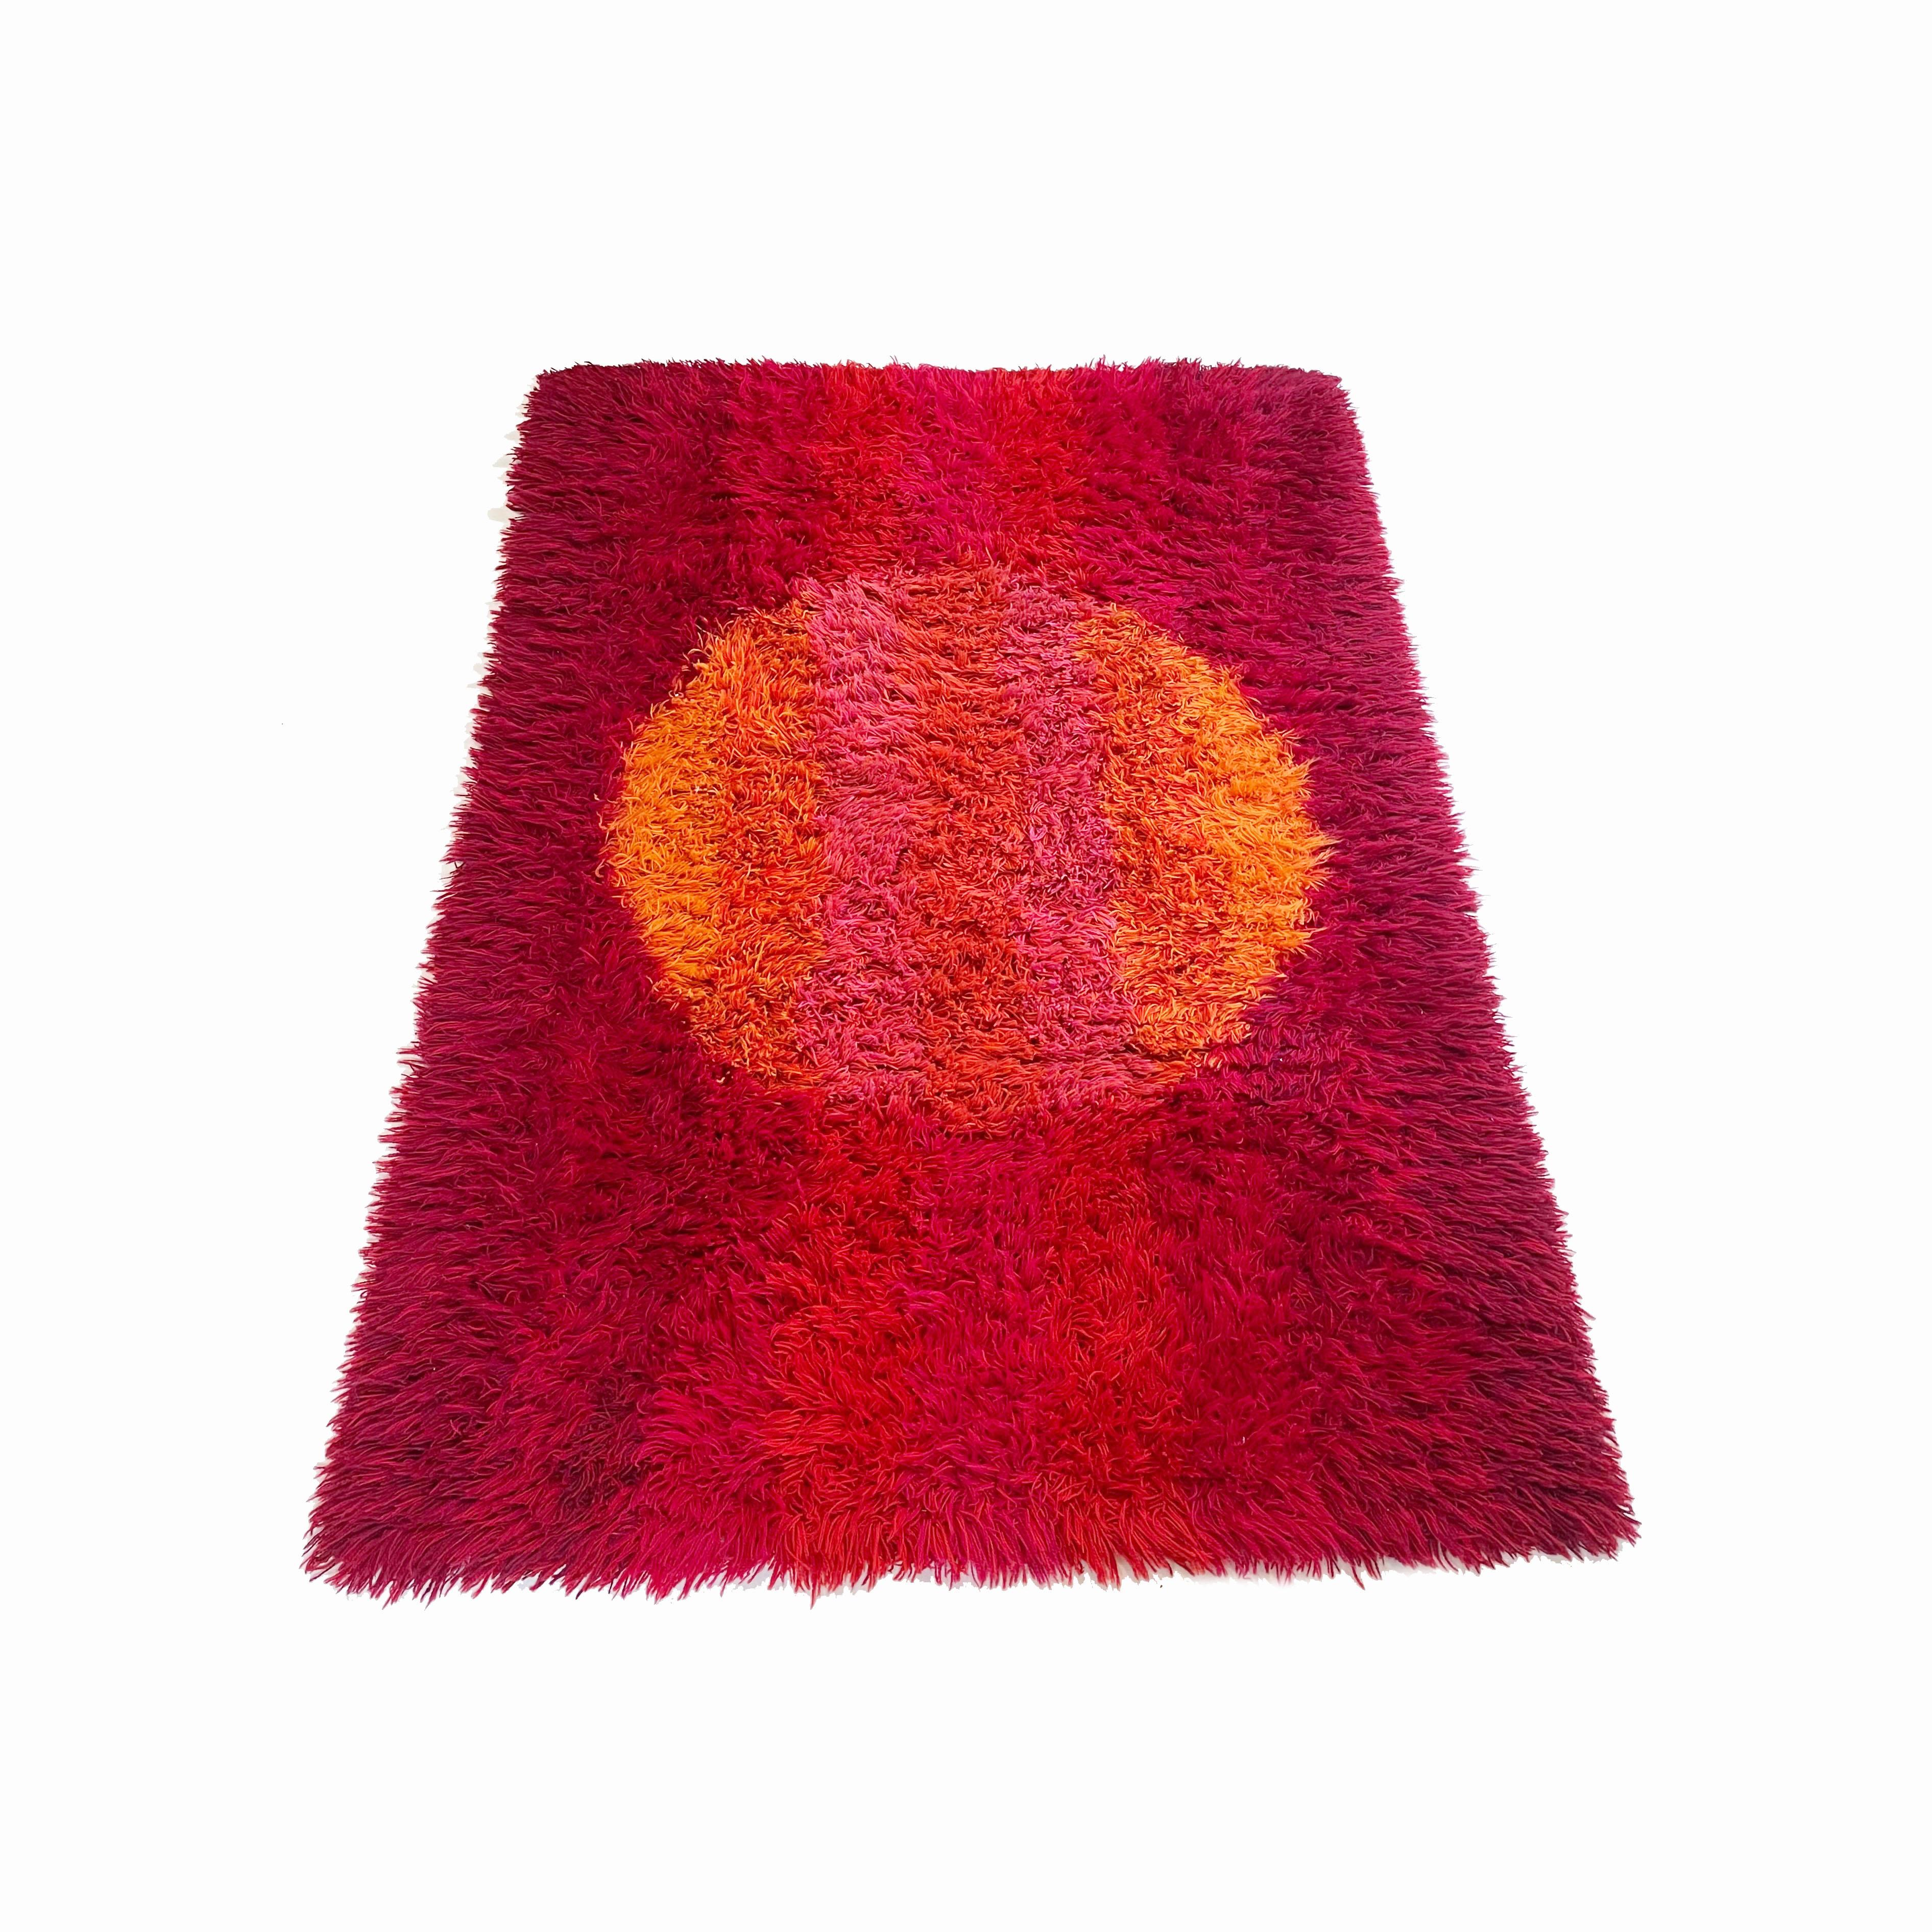 Article:

High pile Rya rug


Decade:

1970s


Origin:

Scandinavia, Sweden


Material:

100% wool



This rug is a great example of 1970s pop art interior. Made in high quality Rya weaving technique in Finland in the 1970s, it is made of 100% wool